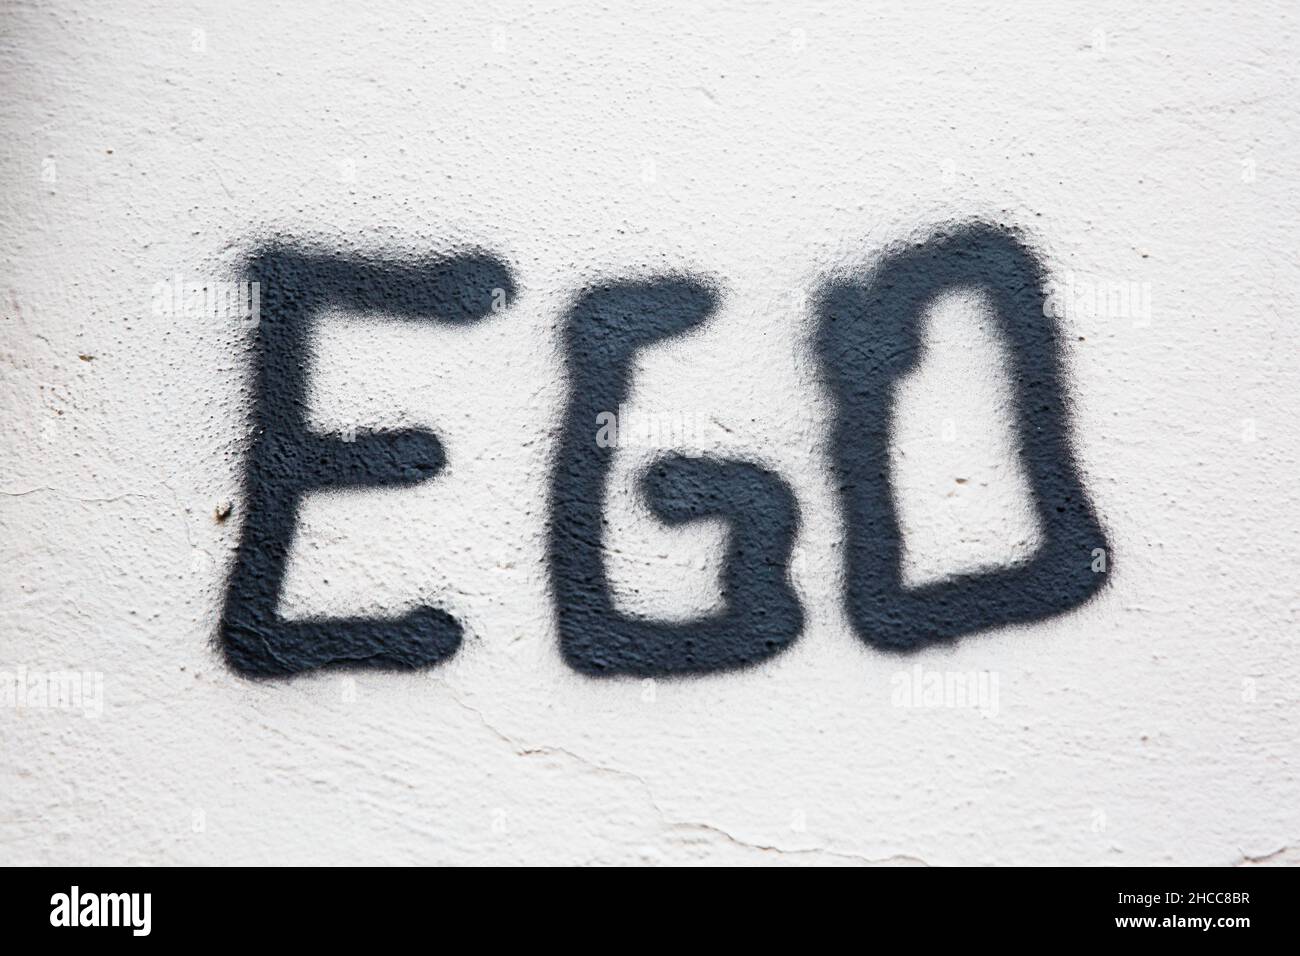 Ego, Characters On A Wall, Close Up Full Frame. Egoism, Selfish. Stock Photo